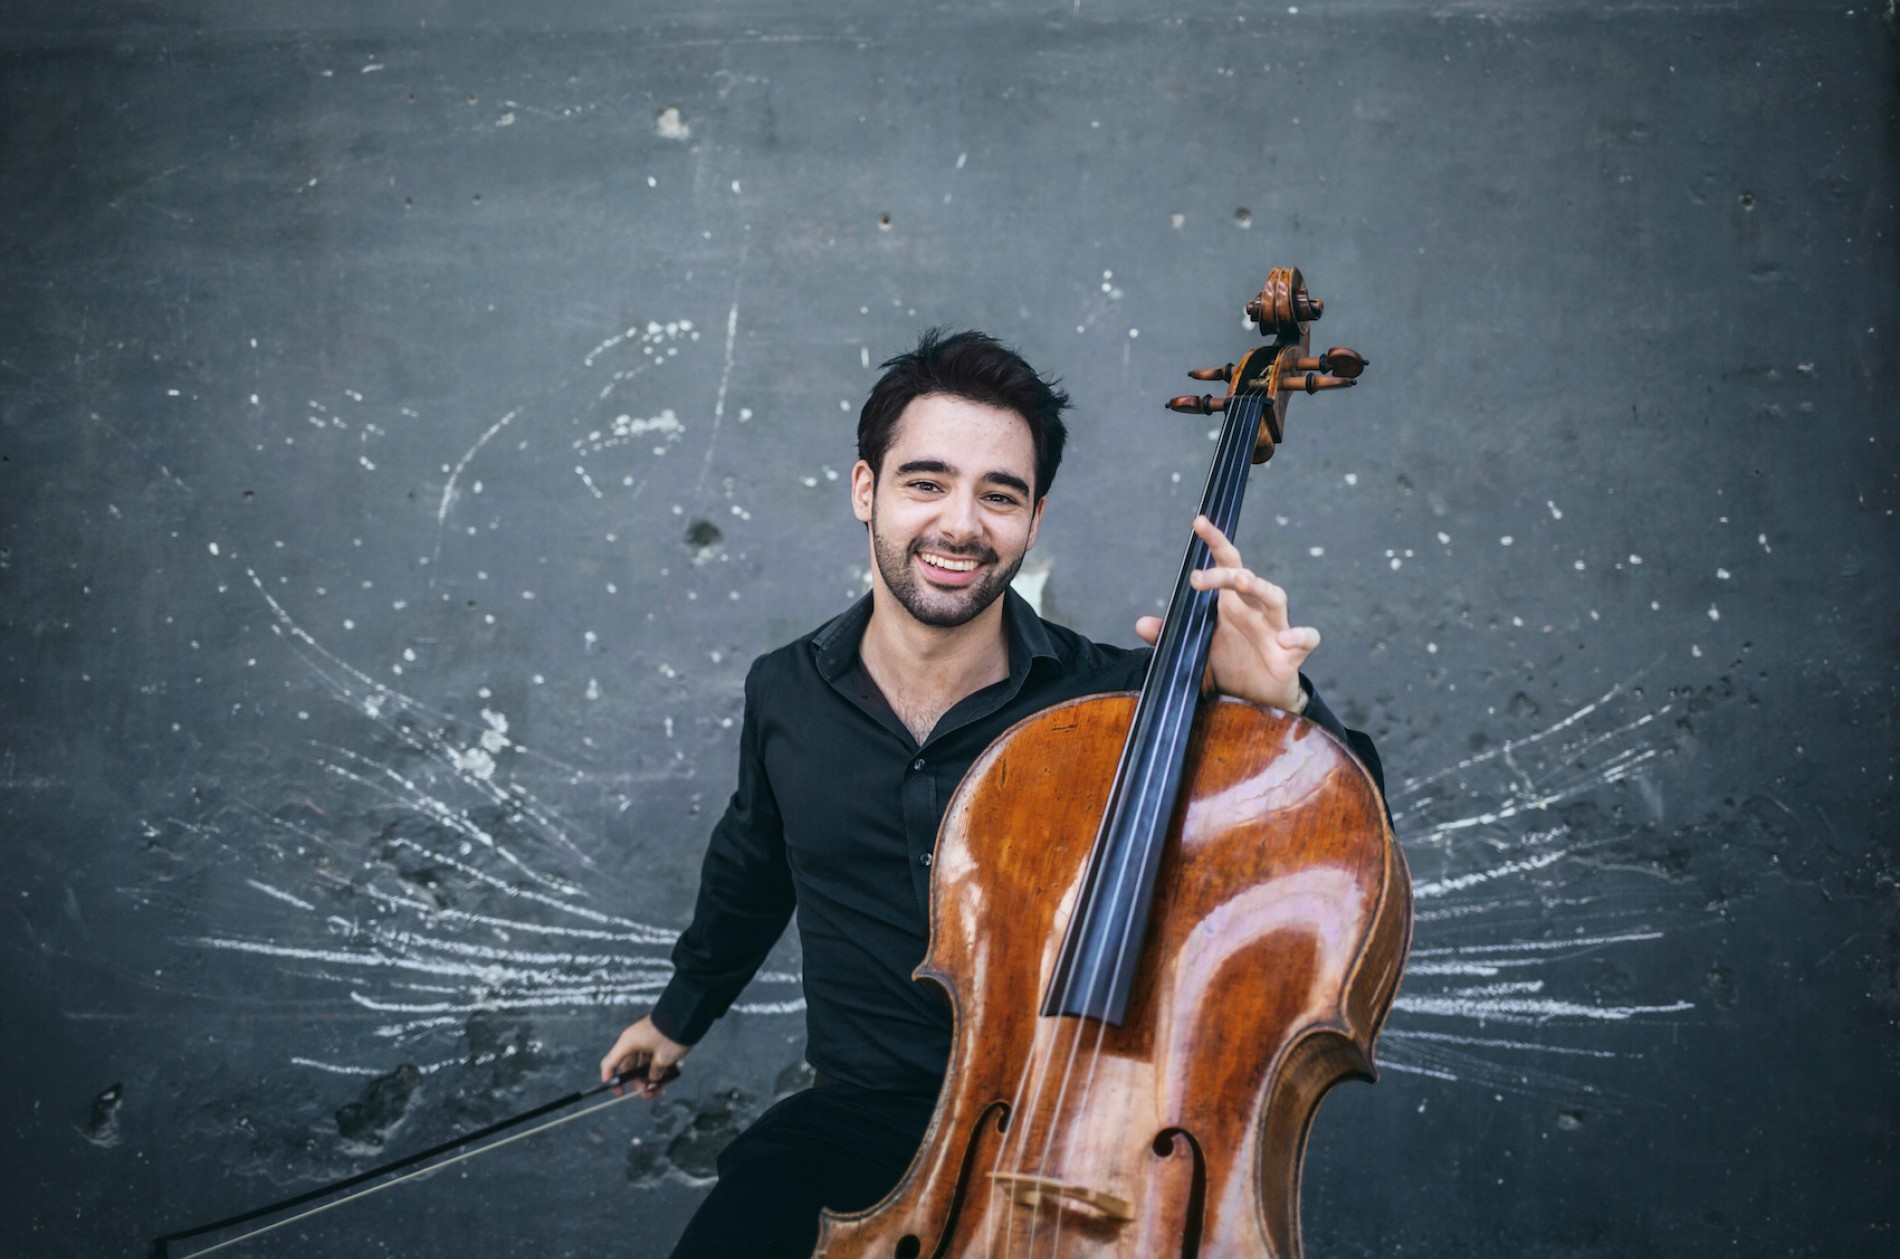 Pablo Ferrández holds his cello up in front of a spatter-patterned wall.